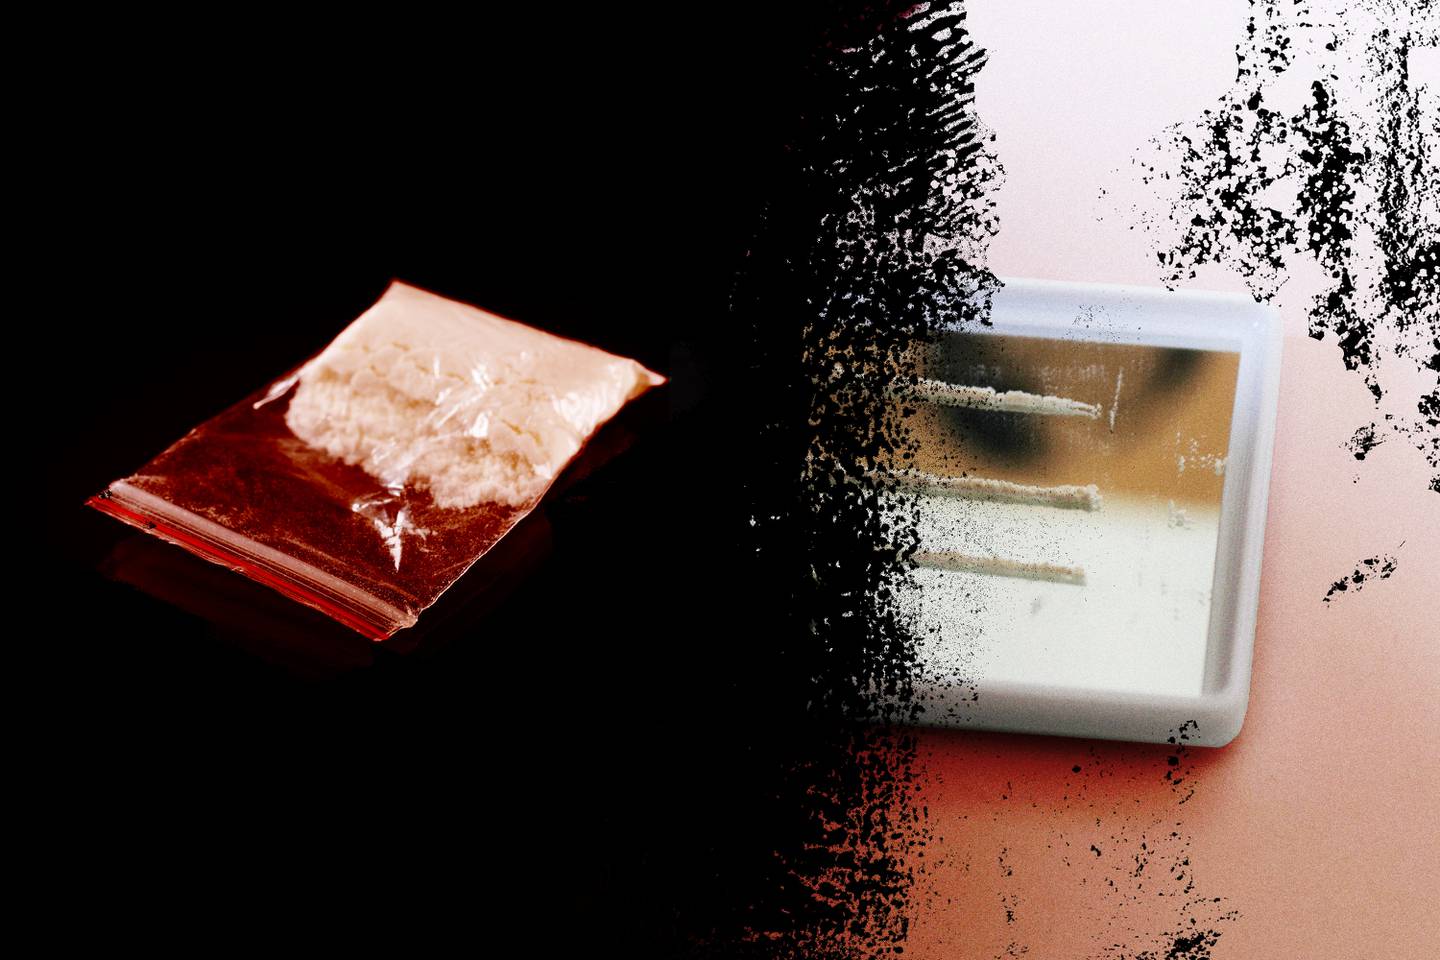 Photo collage of small bag of powder on left, three lines of cocaine on small mirror on right. Black marks spill from left to right.